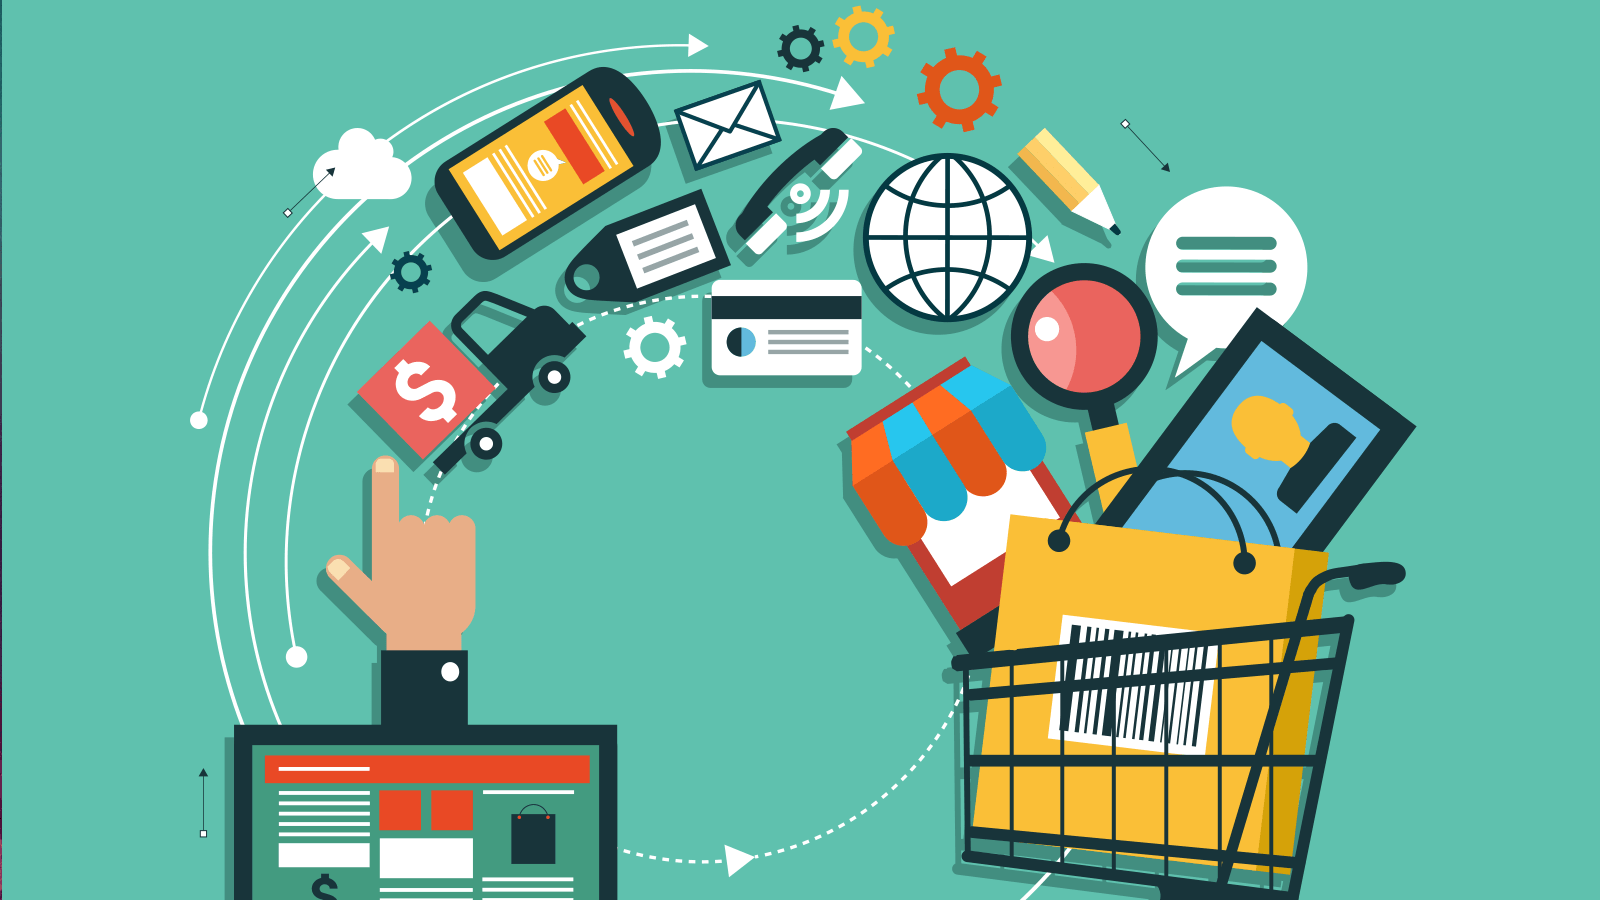 Strengthen the tax administration for e-commerce